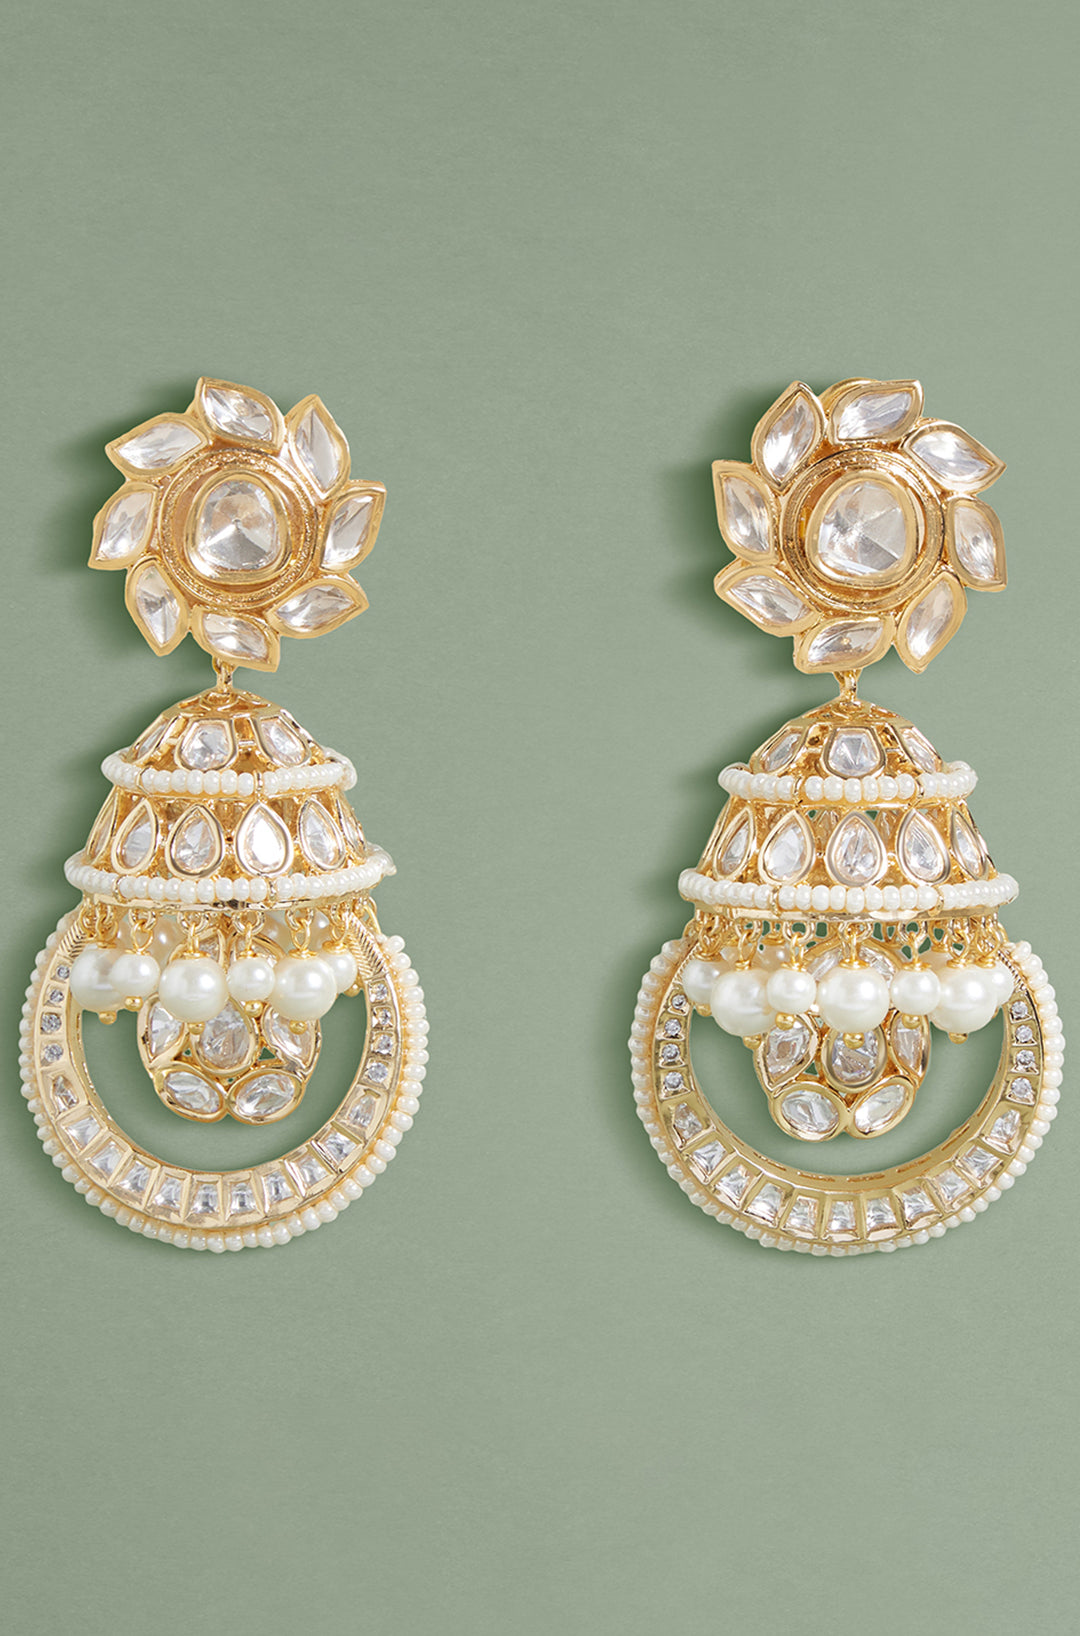 Pin by Kashmira Brid on Jewellery | Gold jhumka earrings, Gold earrings  designs, Gold jewellery design necklaces